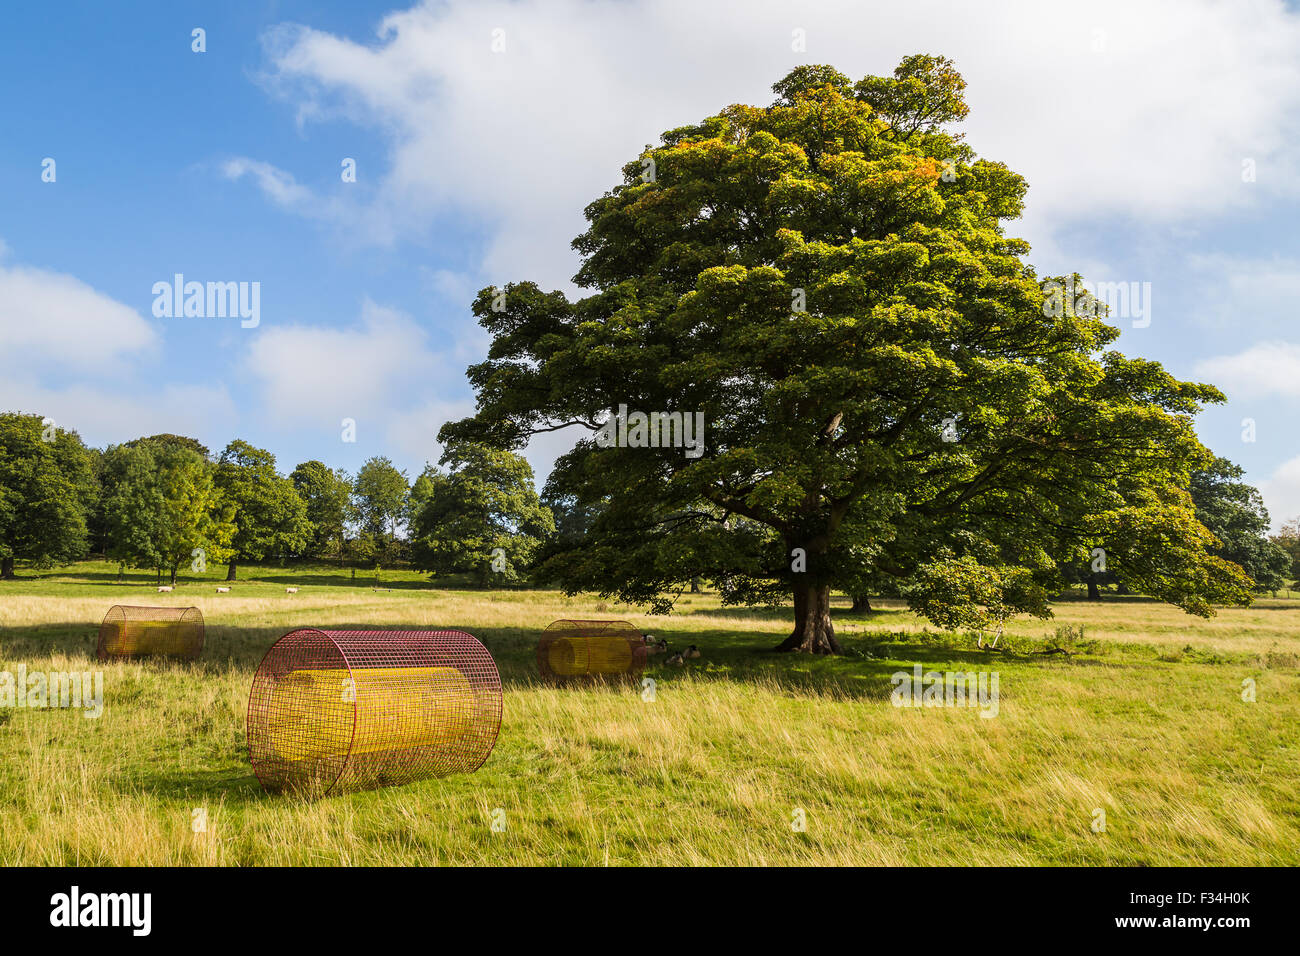 Floating hay bales known as 'Summer Fields' sculptures seen at Yorkshire Sculpture Park. Stock Photo